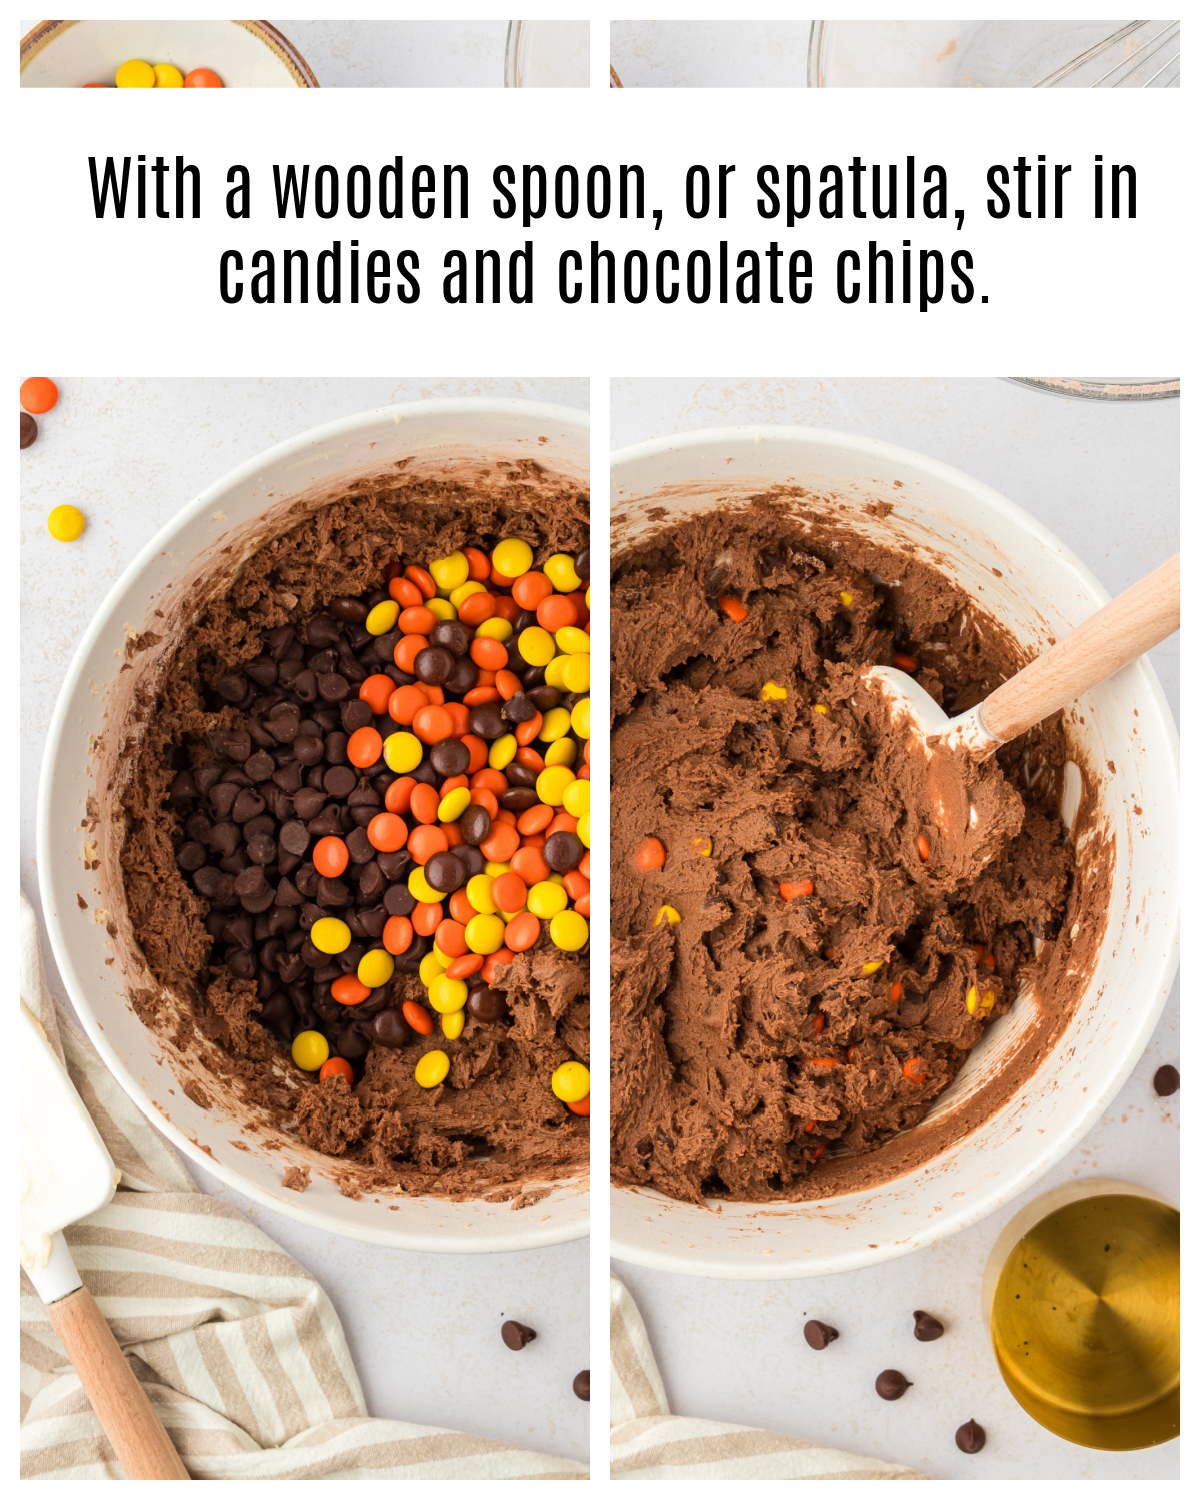 reese's pieces and chocolate chips added to chocolate cookie dough